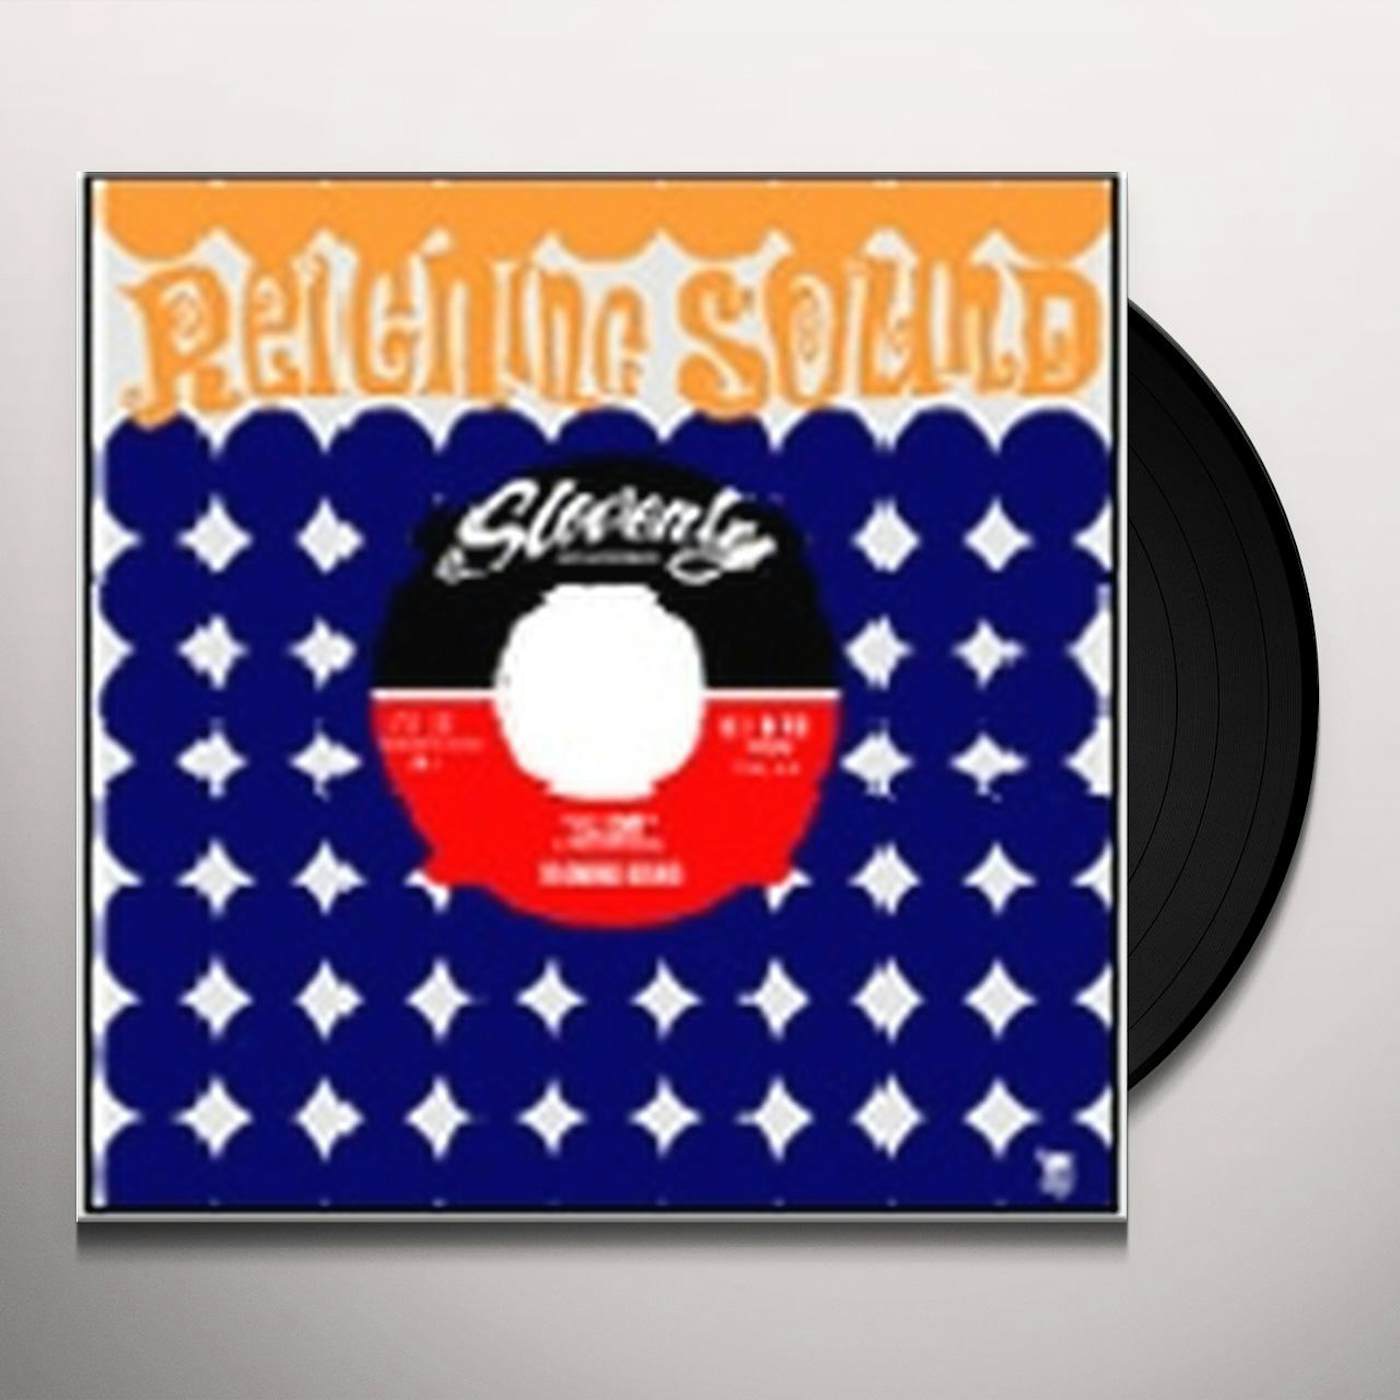 Reigning Sound I'll Cry Vinyl Record